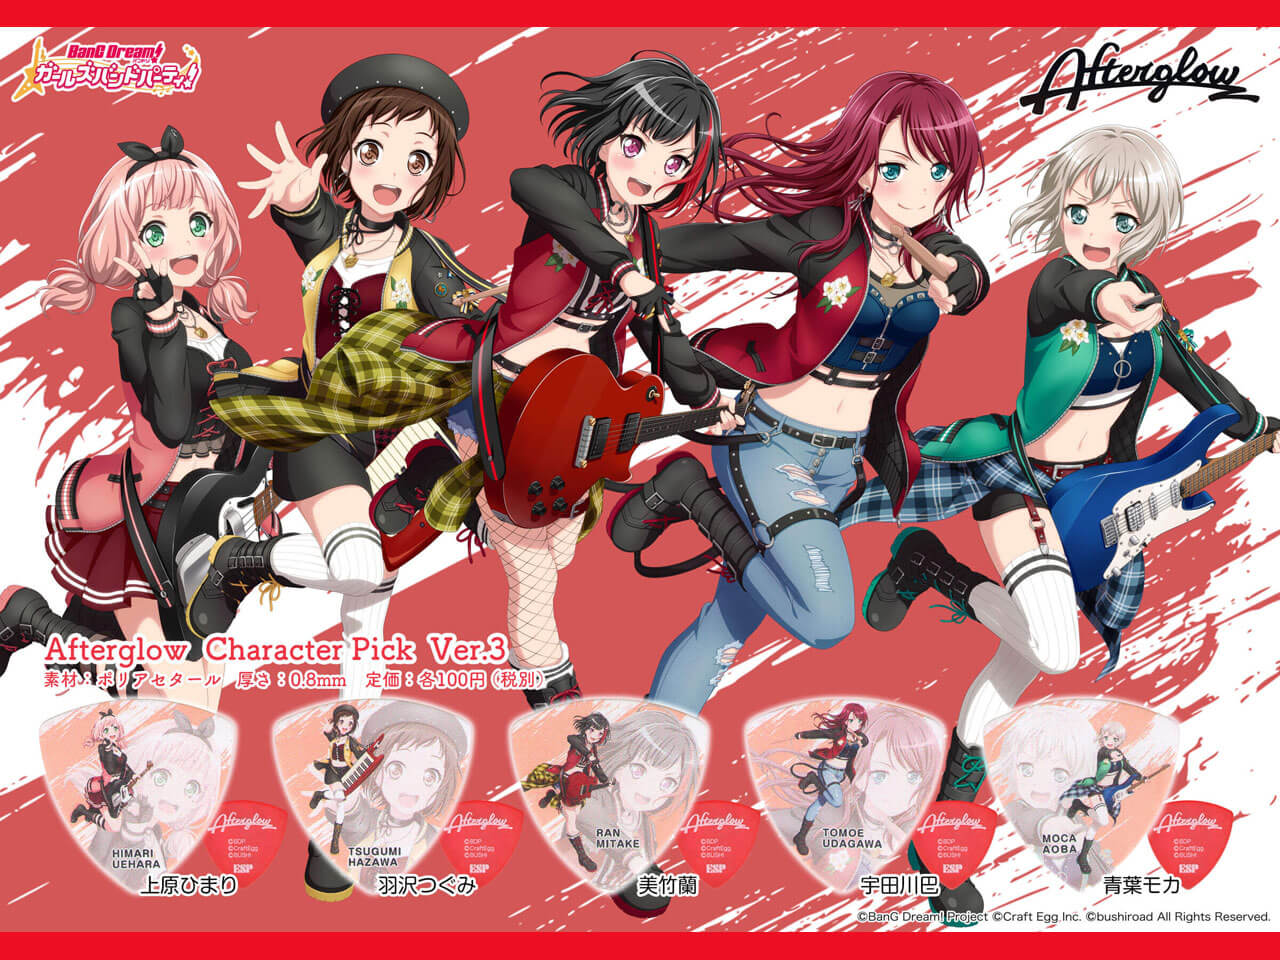 【ESP×BanG Dream!コラボピック】Afterglow Character Pick Ver.3 "上原ひまり"10枚セット（GBP HIMARI AFTERGLOW 3）